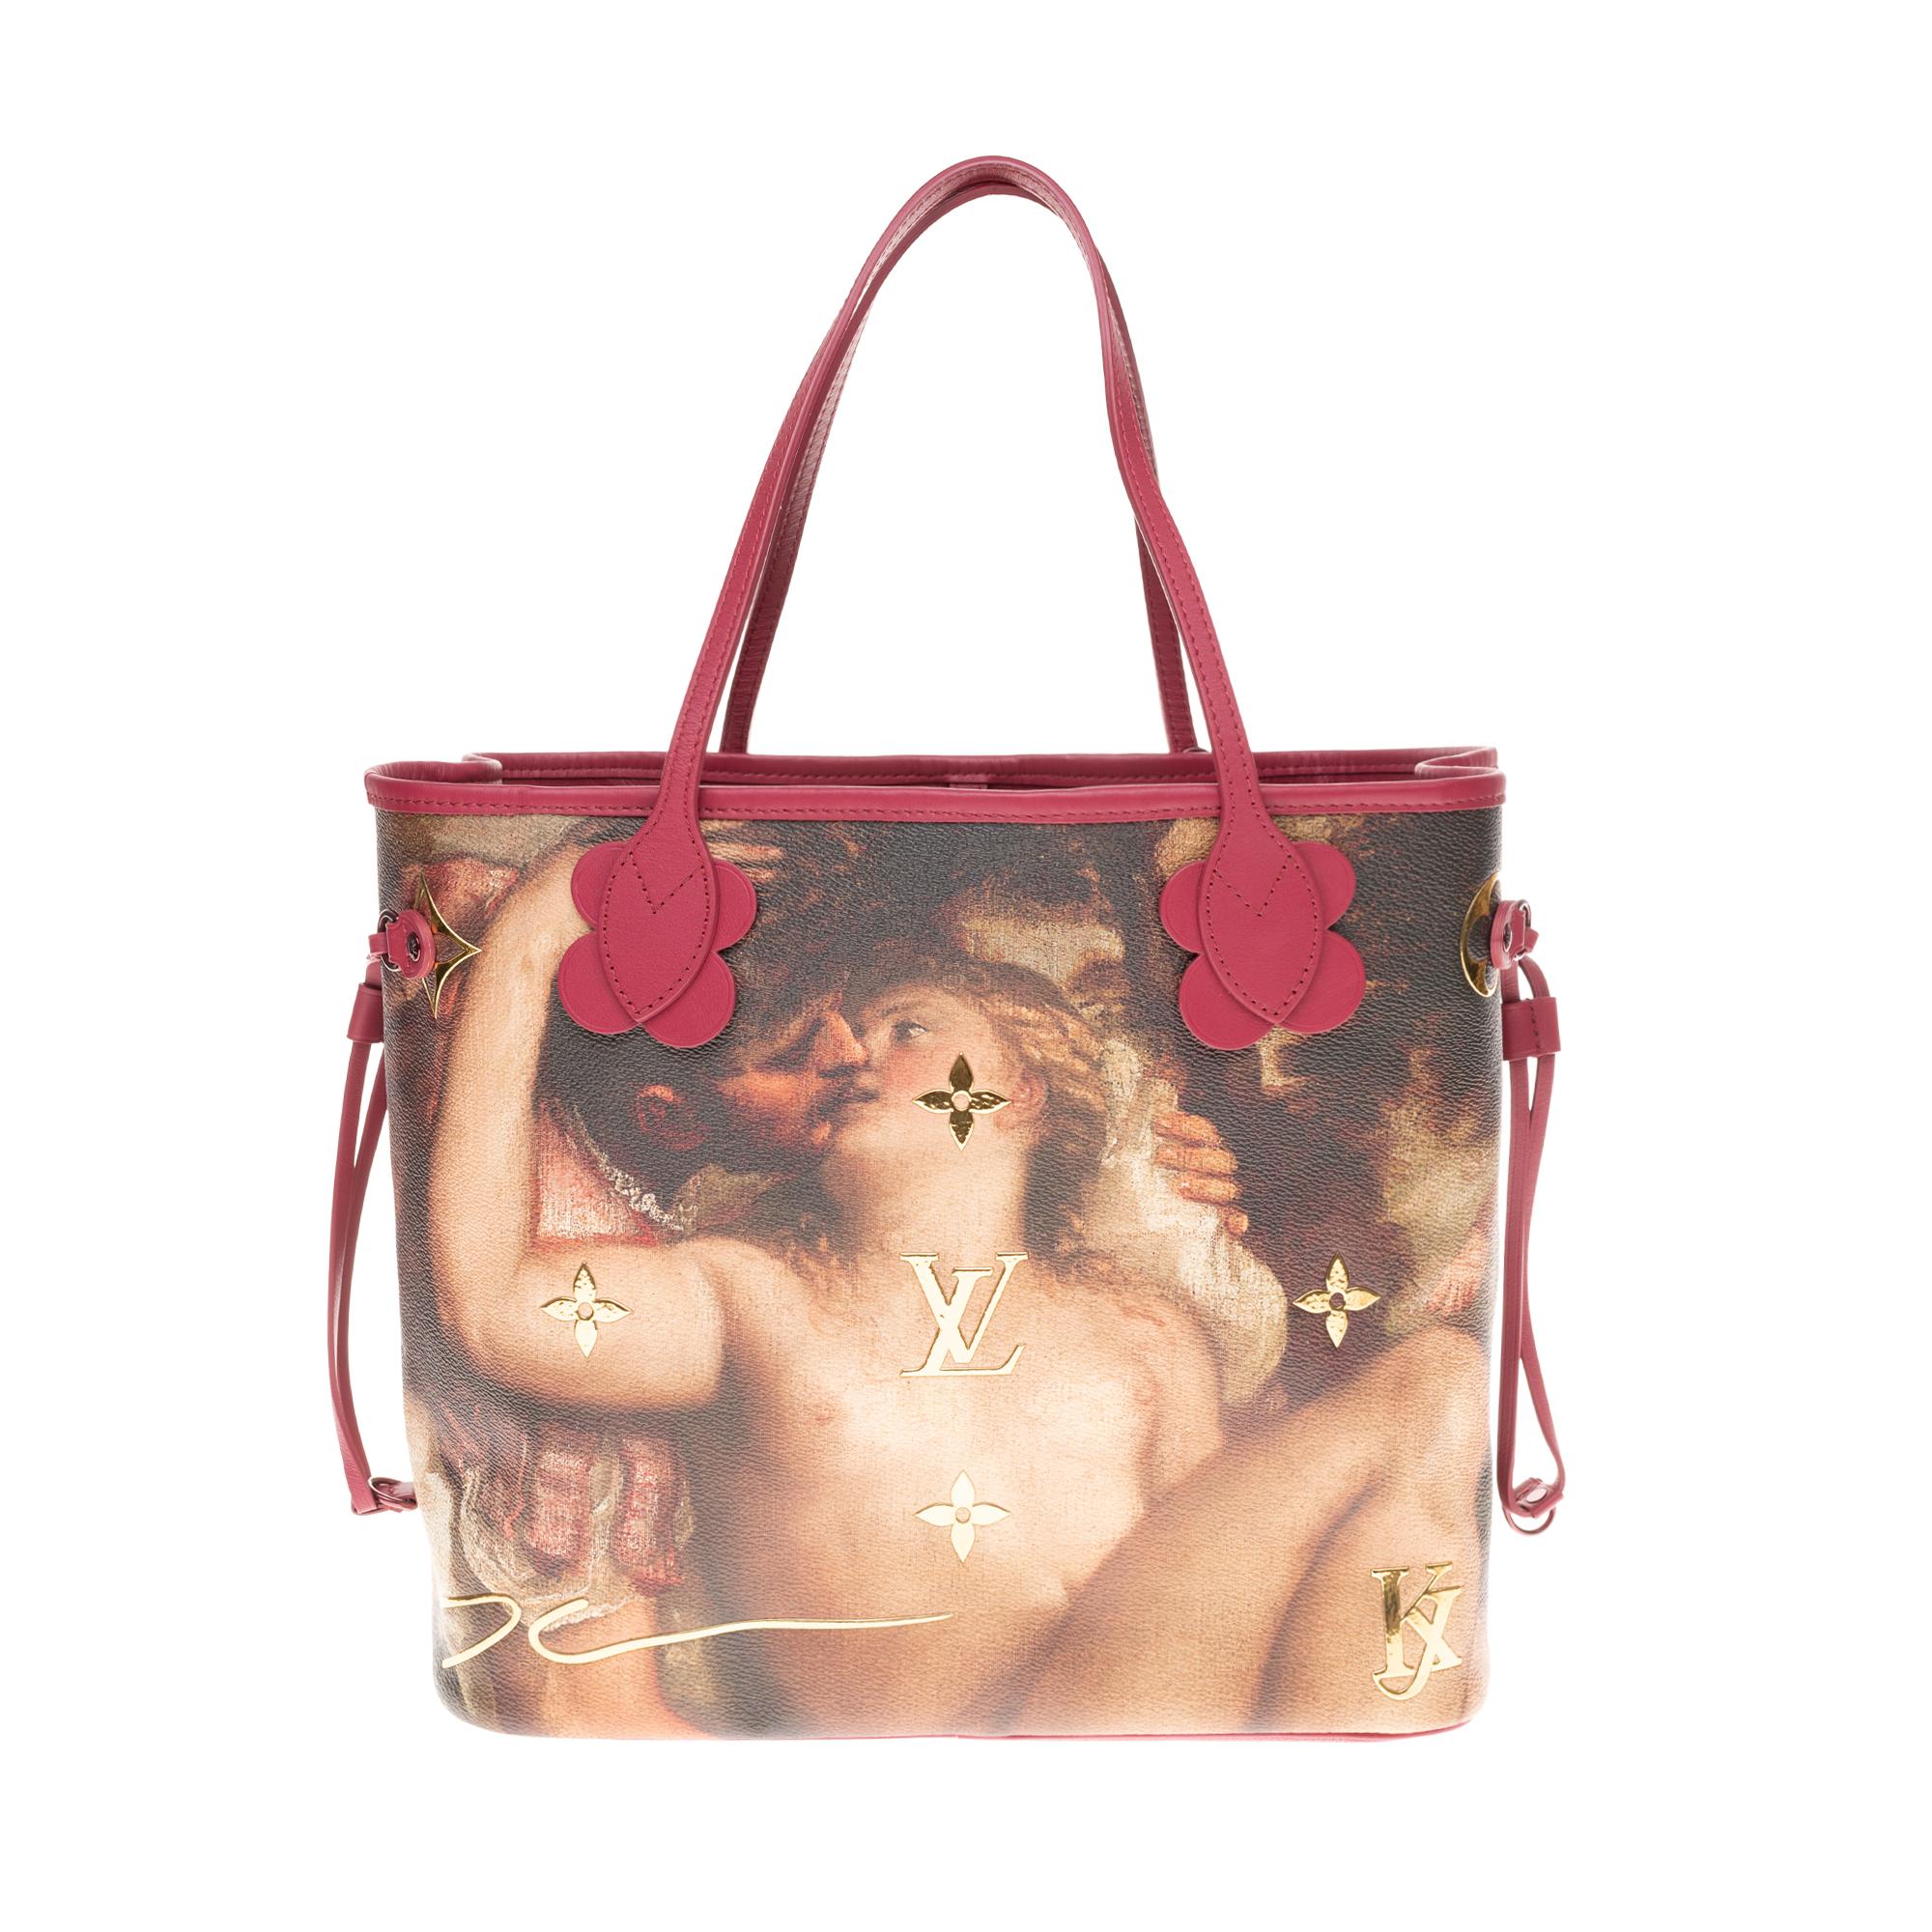 Brown Louis Vuitton Neverfull handbag limited edition  Titian by Jeff Koons 